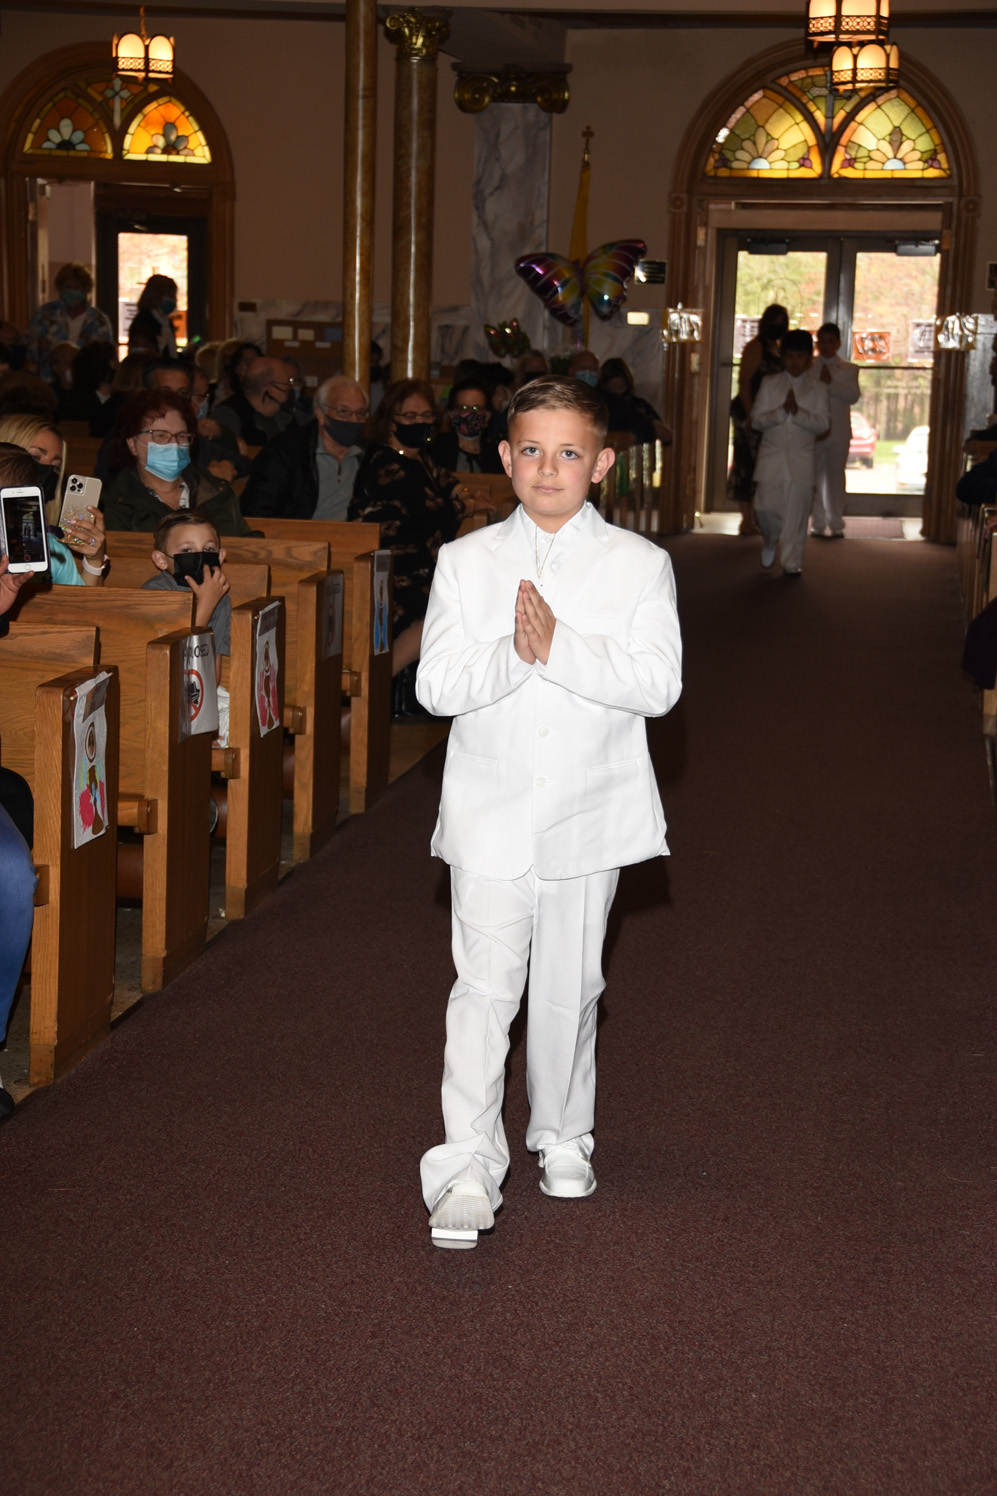 FIRST-COMMUNION-MAY-2-2021-1001001035